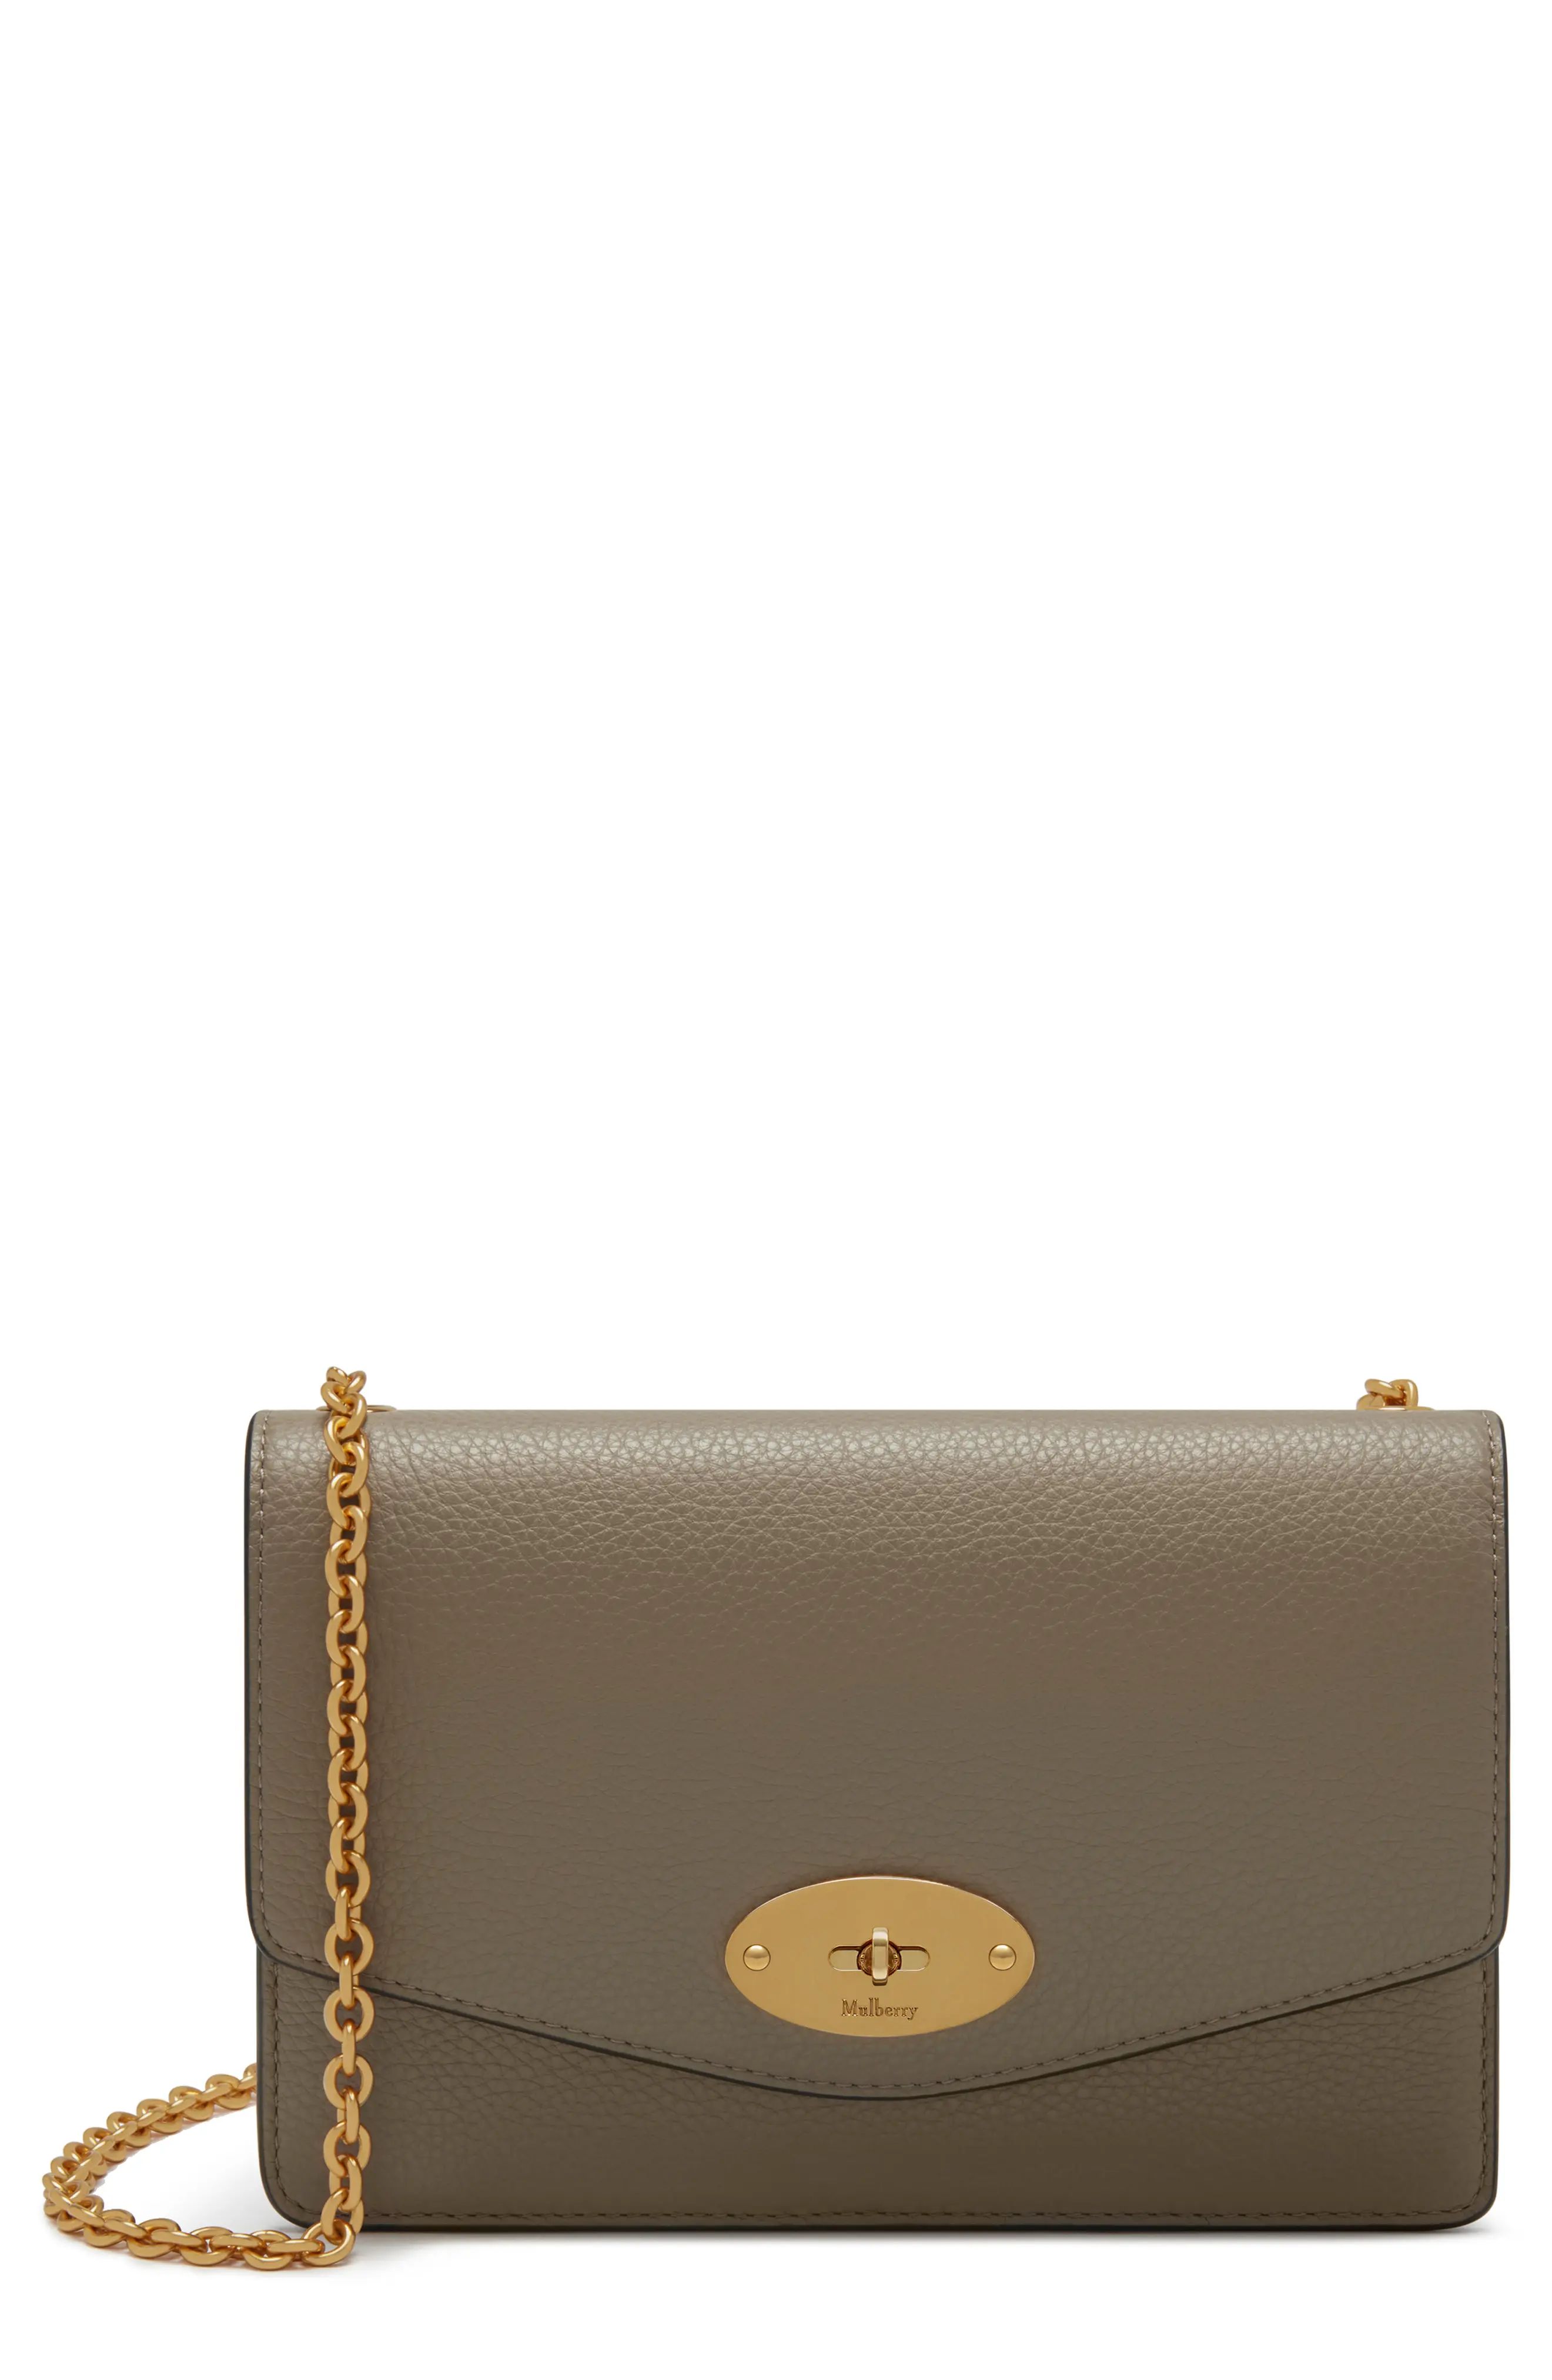 Mulberry Small Darley Leather Clutch in Solid Grey at Nordstrom | Nordstrom